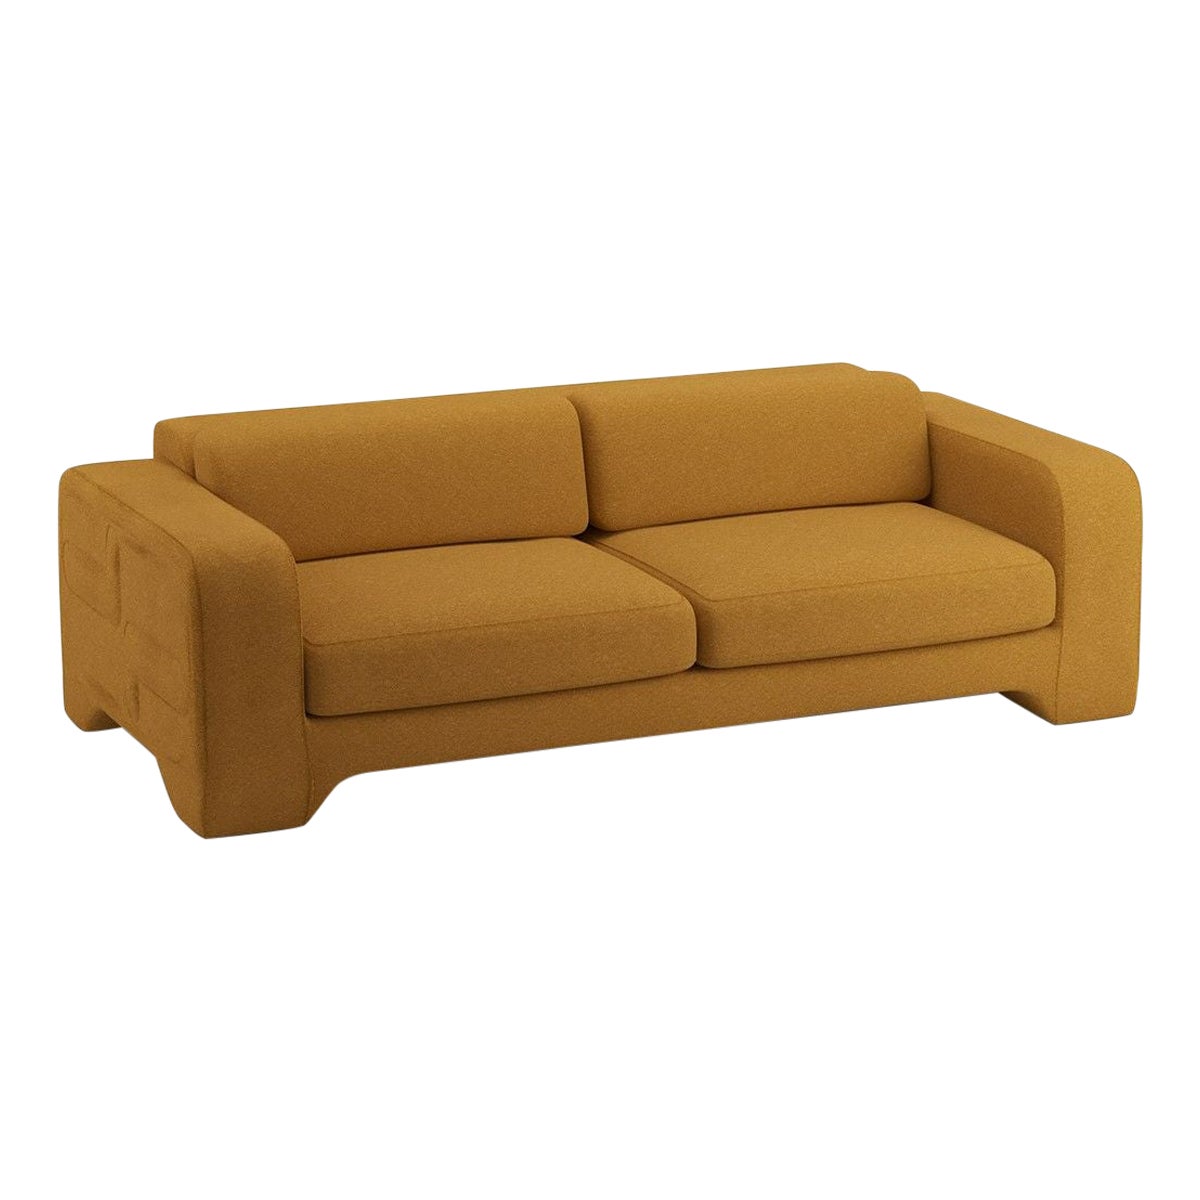 Popus Editions Giovanna 4 Seater Sofa in Curry Cork Linen Upholstery